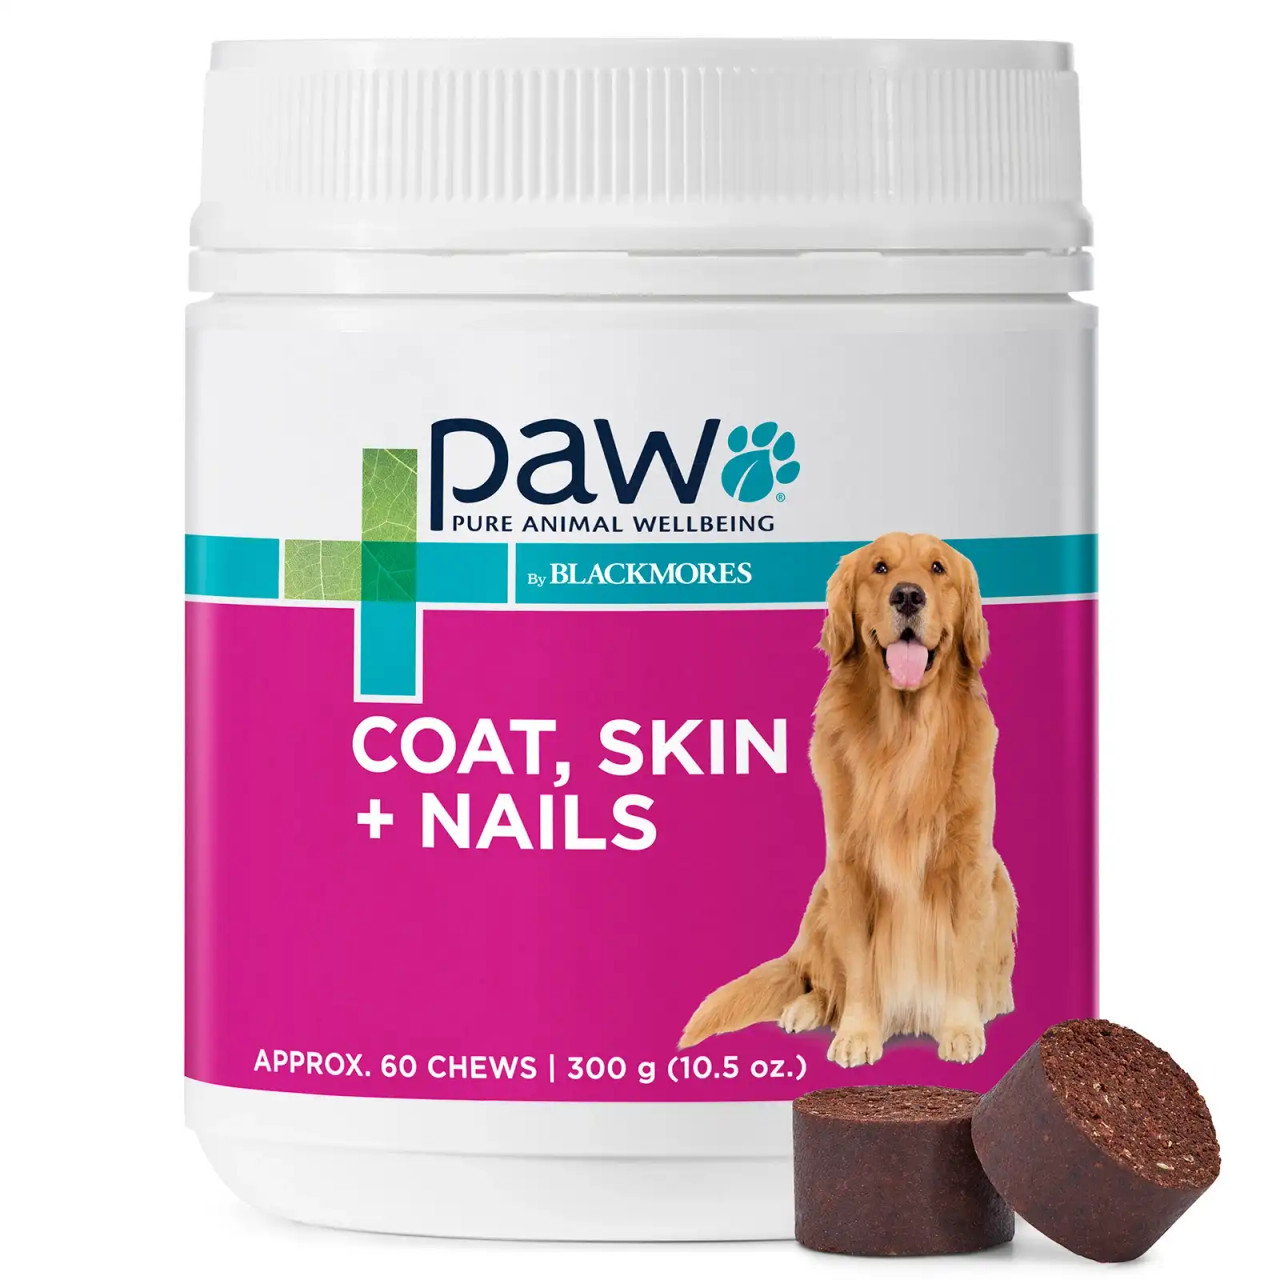 20% rabat på PAW by Blackmores Coat Skin and Nails 300g (10.5 oz) hos Atlantic Pet Products